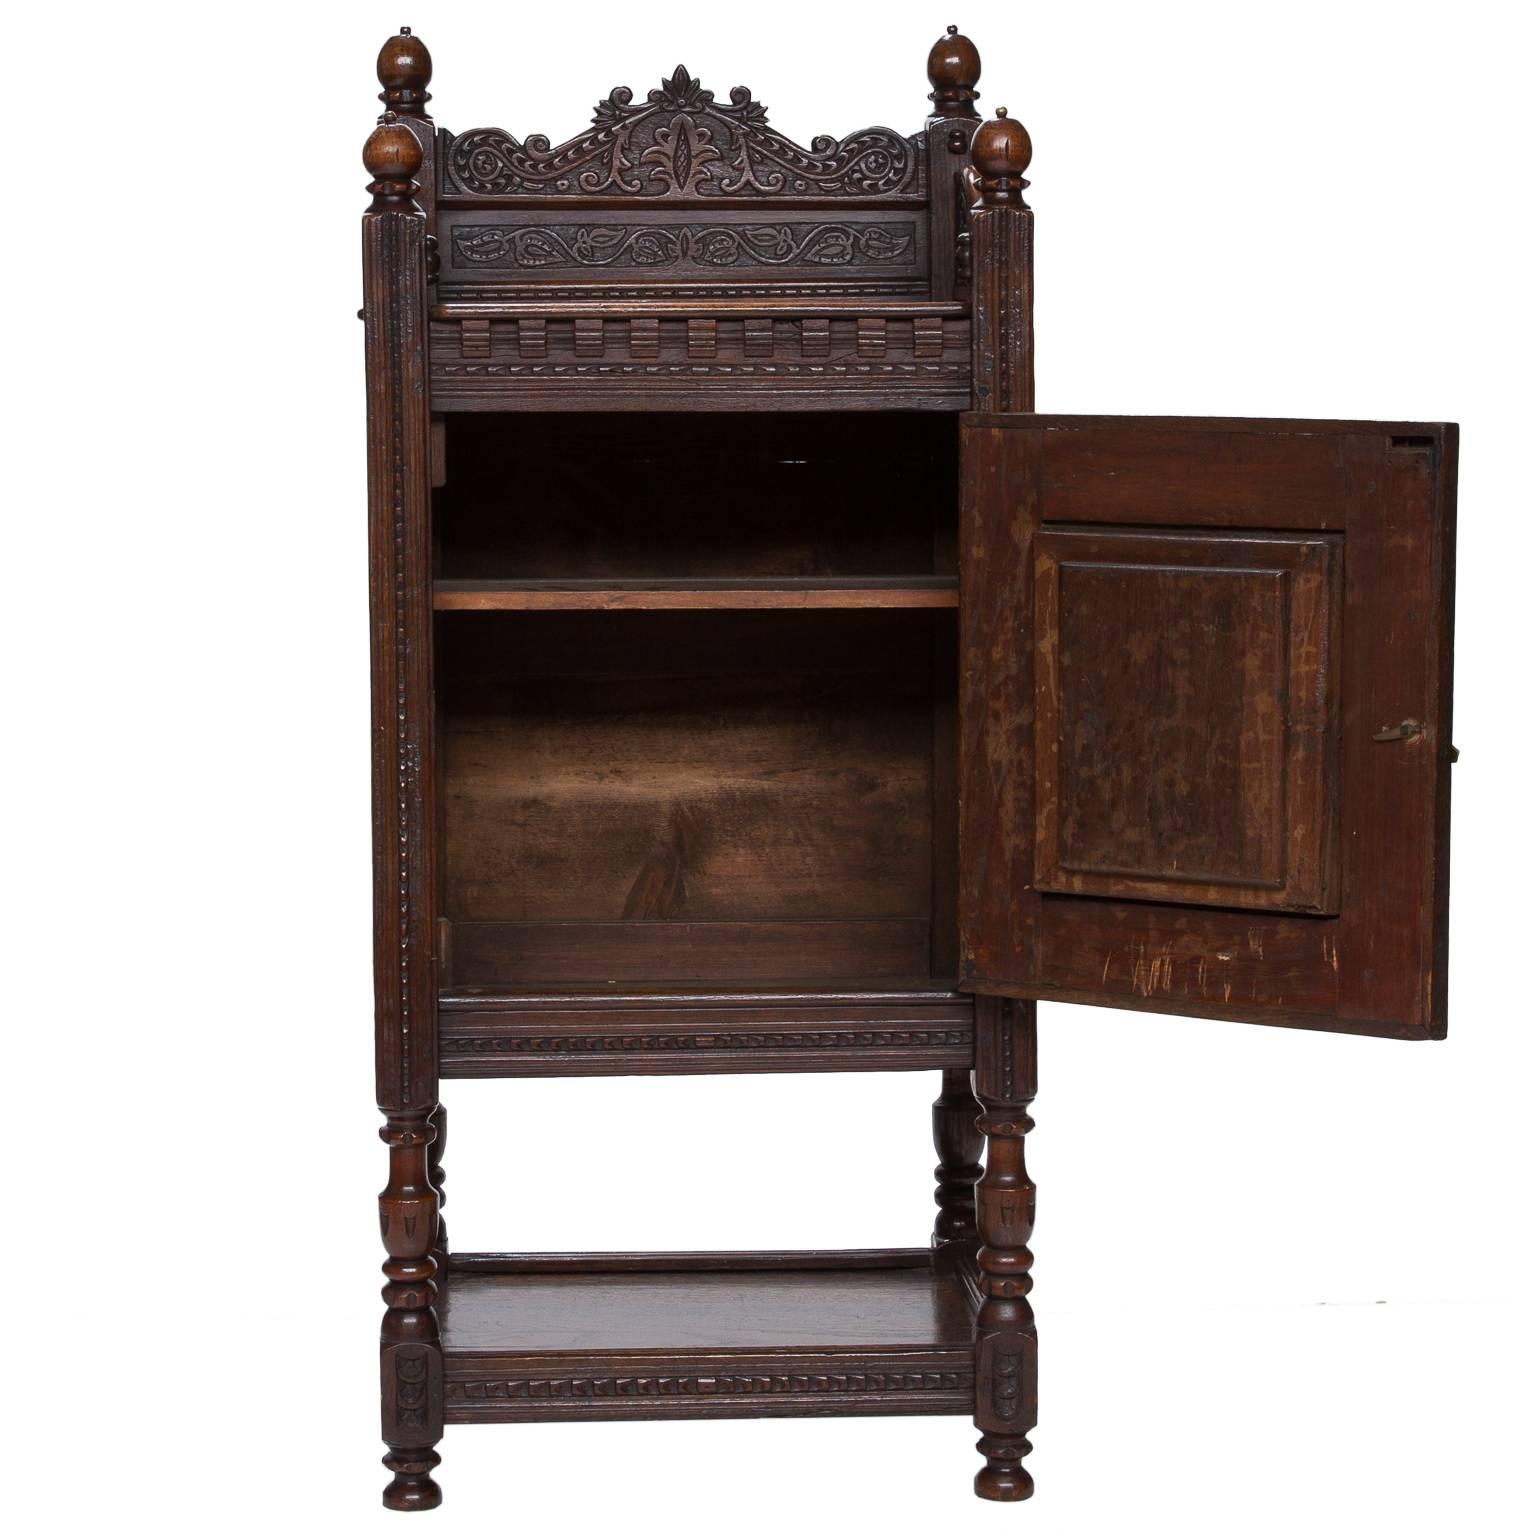 French Provincial 18th Century Cabinet from Burgundy Region of France